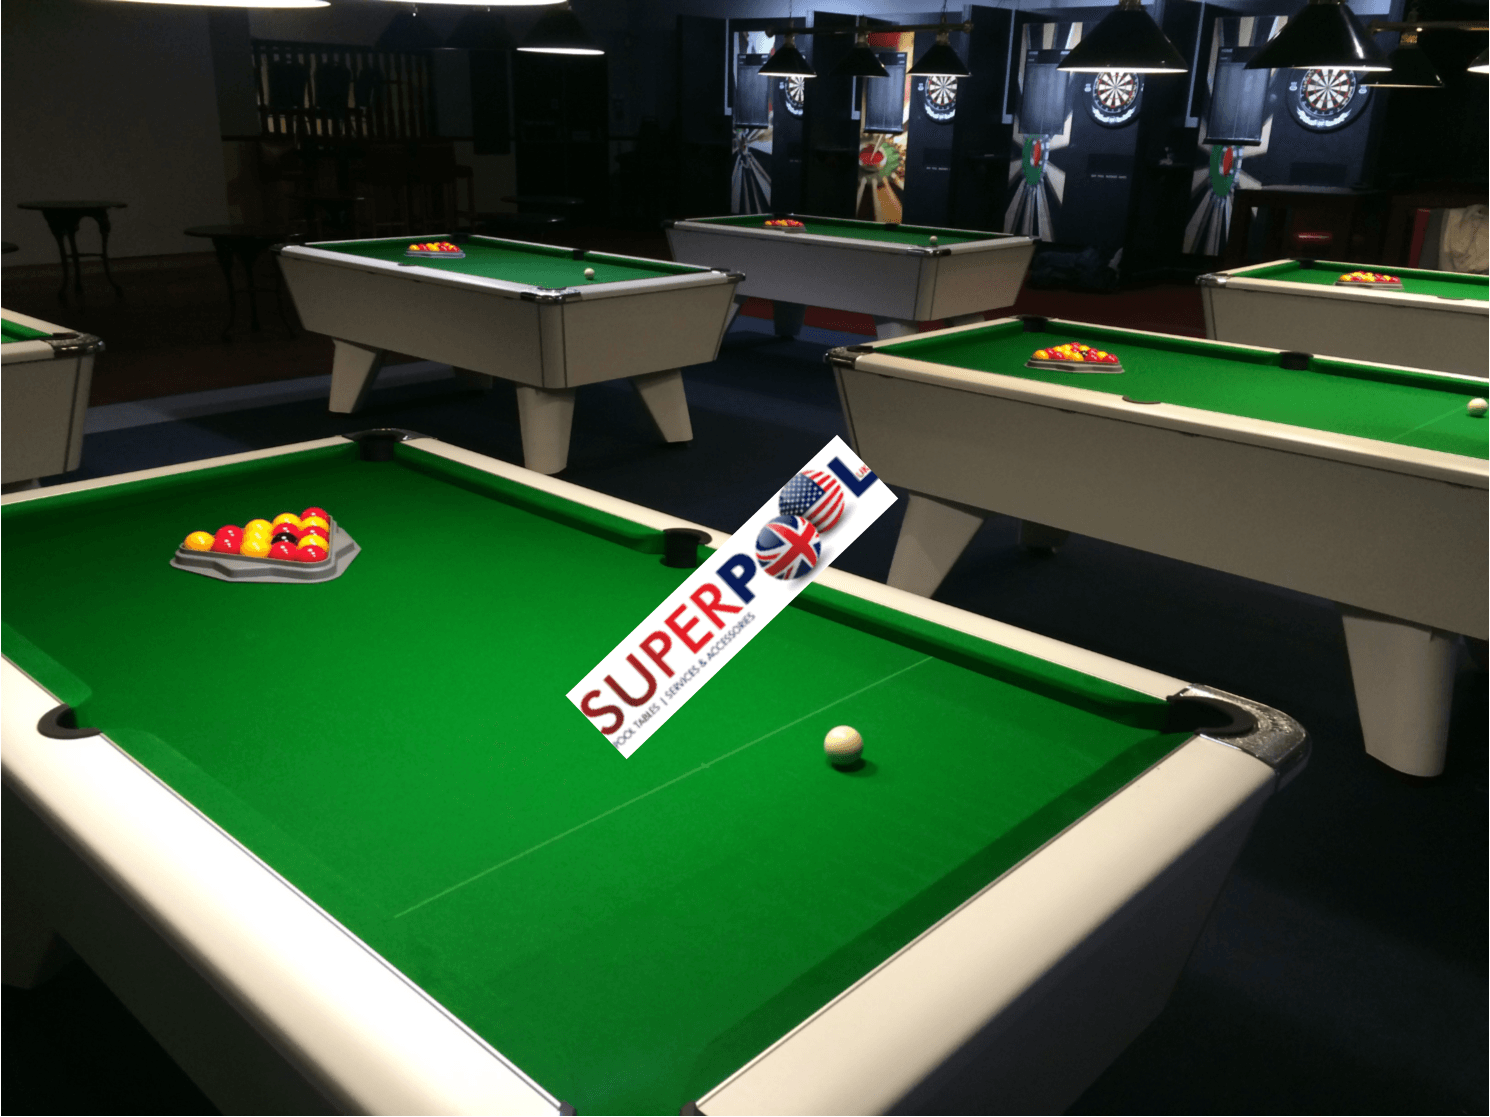 Pool or Darts Mate? (picture)